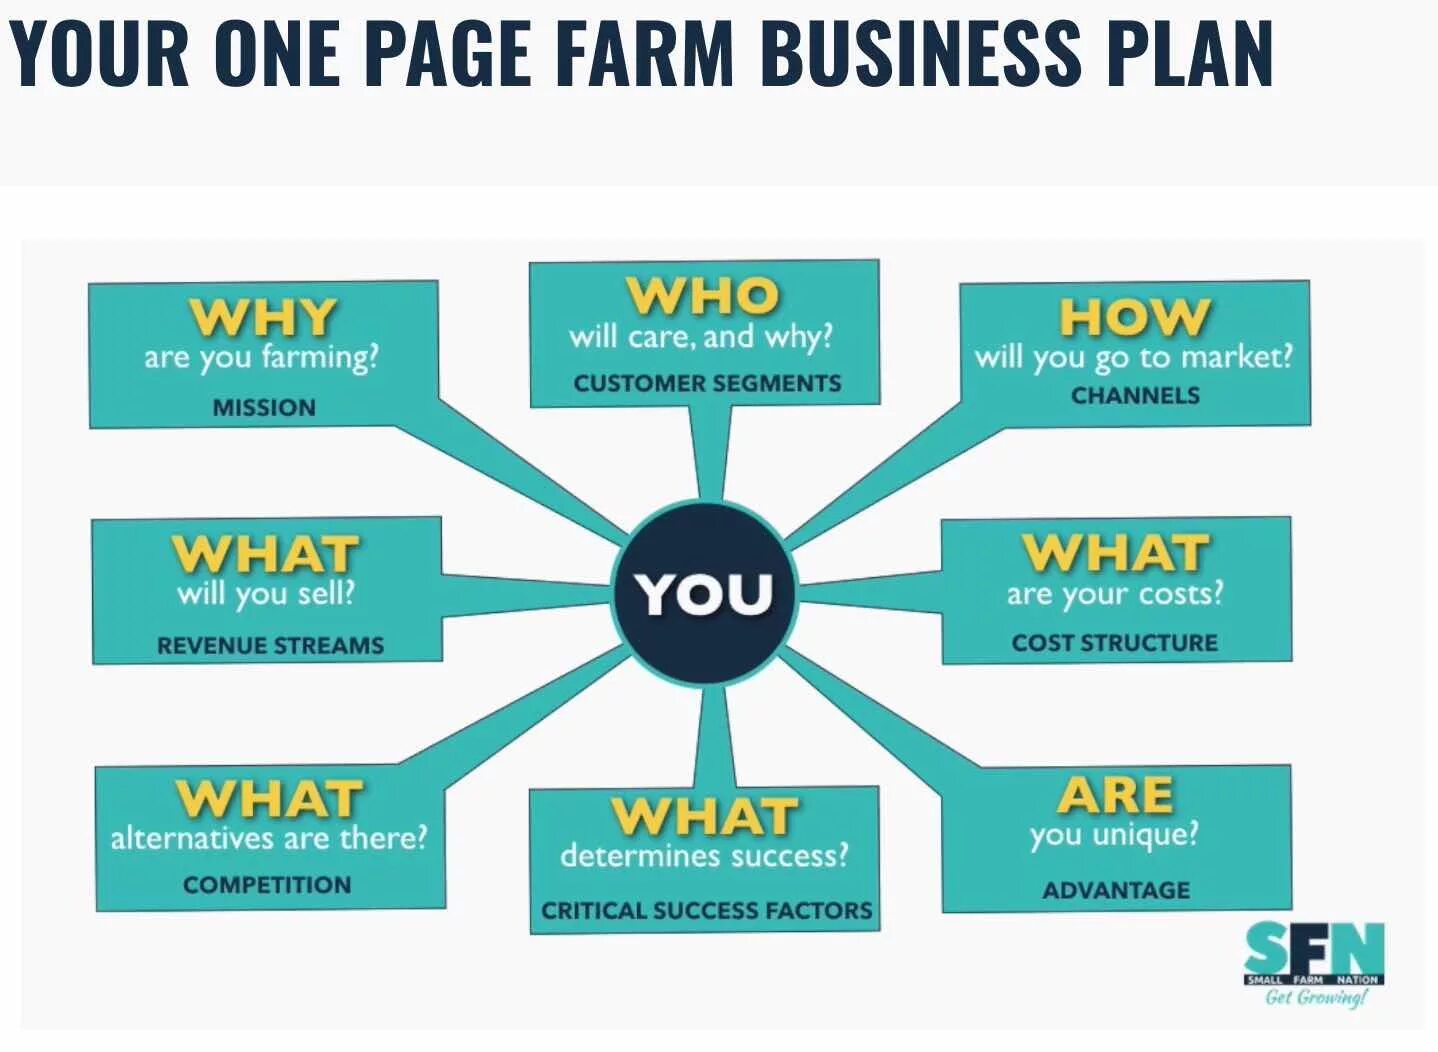 One Page Business Plan. One Page. Small Business Plan. Plan Business Plan размер. Business pages